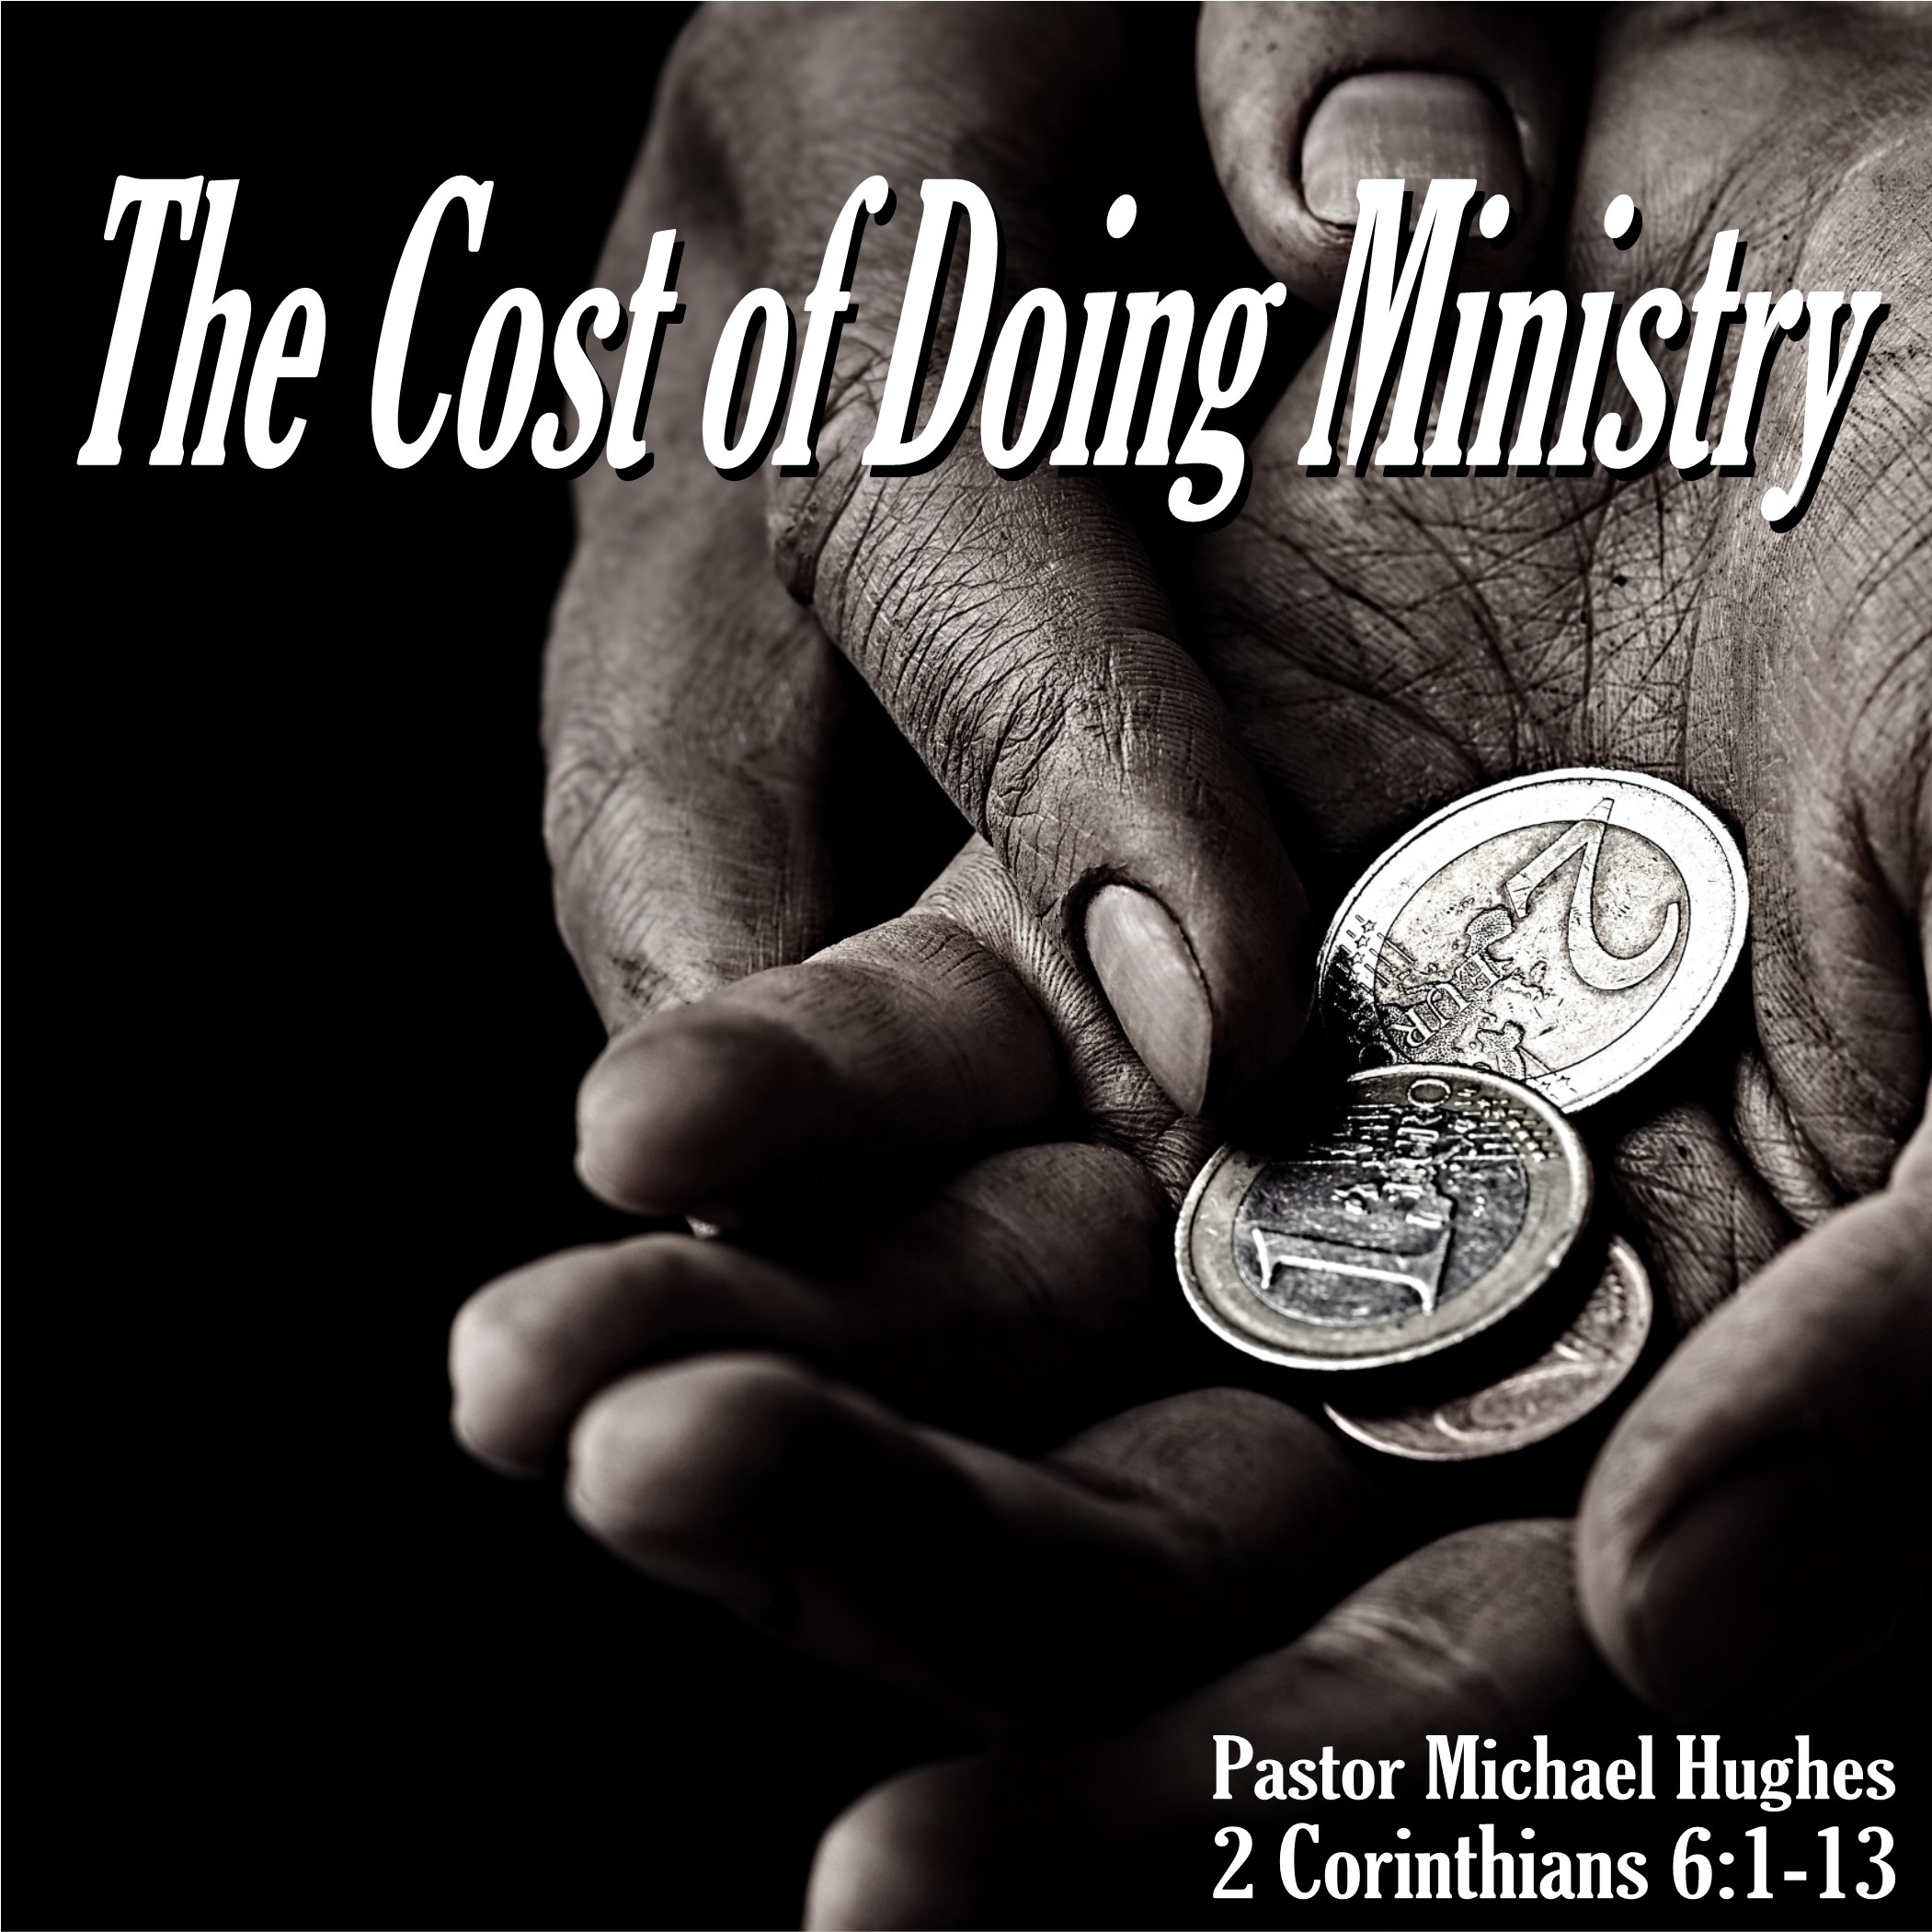 2 Corinthians 6:1-13 ”The Cost of Doing Ministry” w/ Pastor Michael Hughes